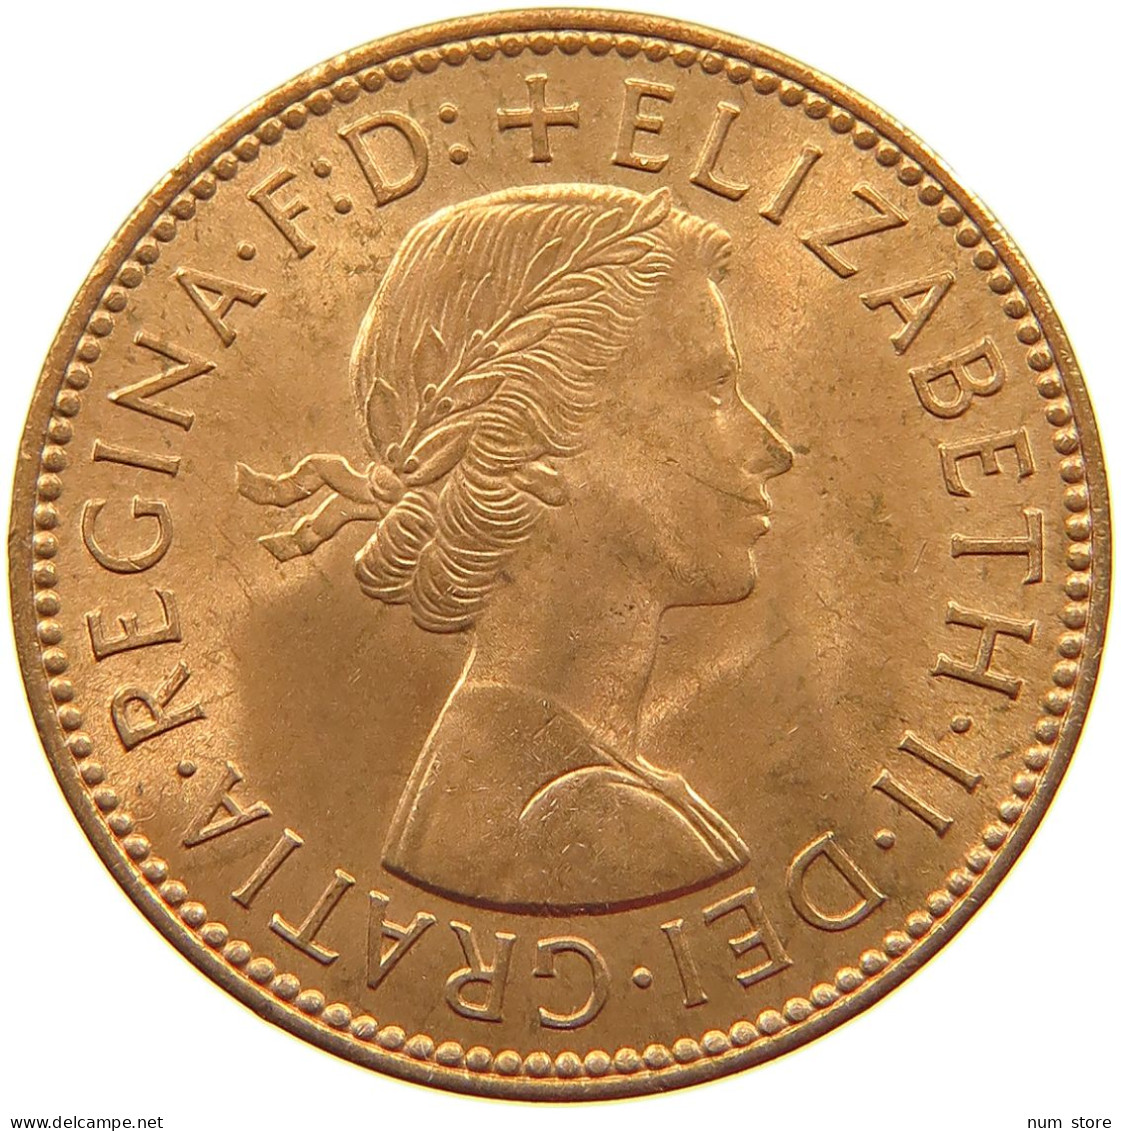 GREAT BRITAIN HALFPENNY 1963 TOP #a039 0355 - C. 1/2 Penny